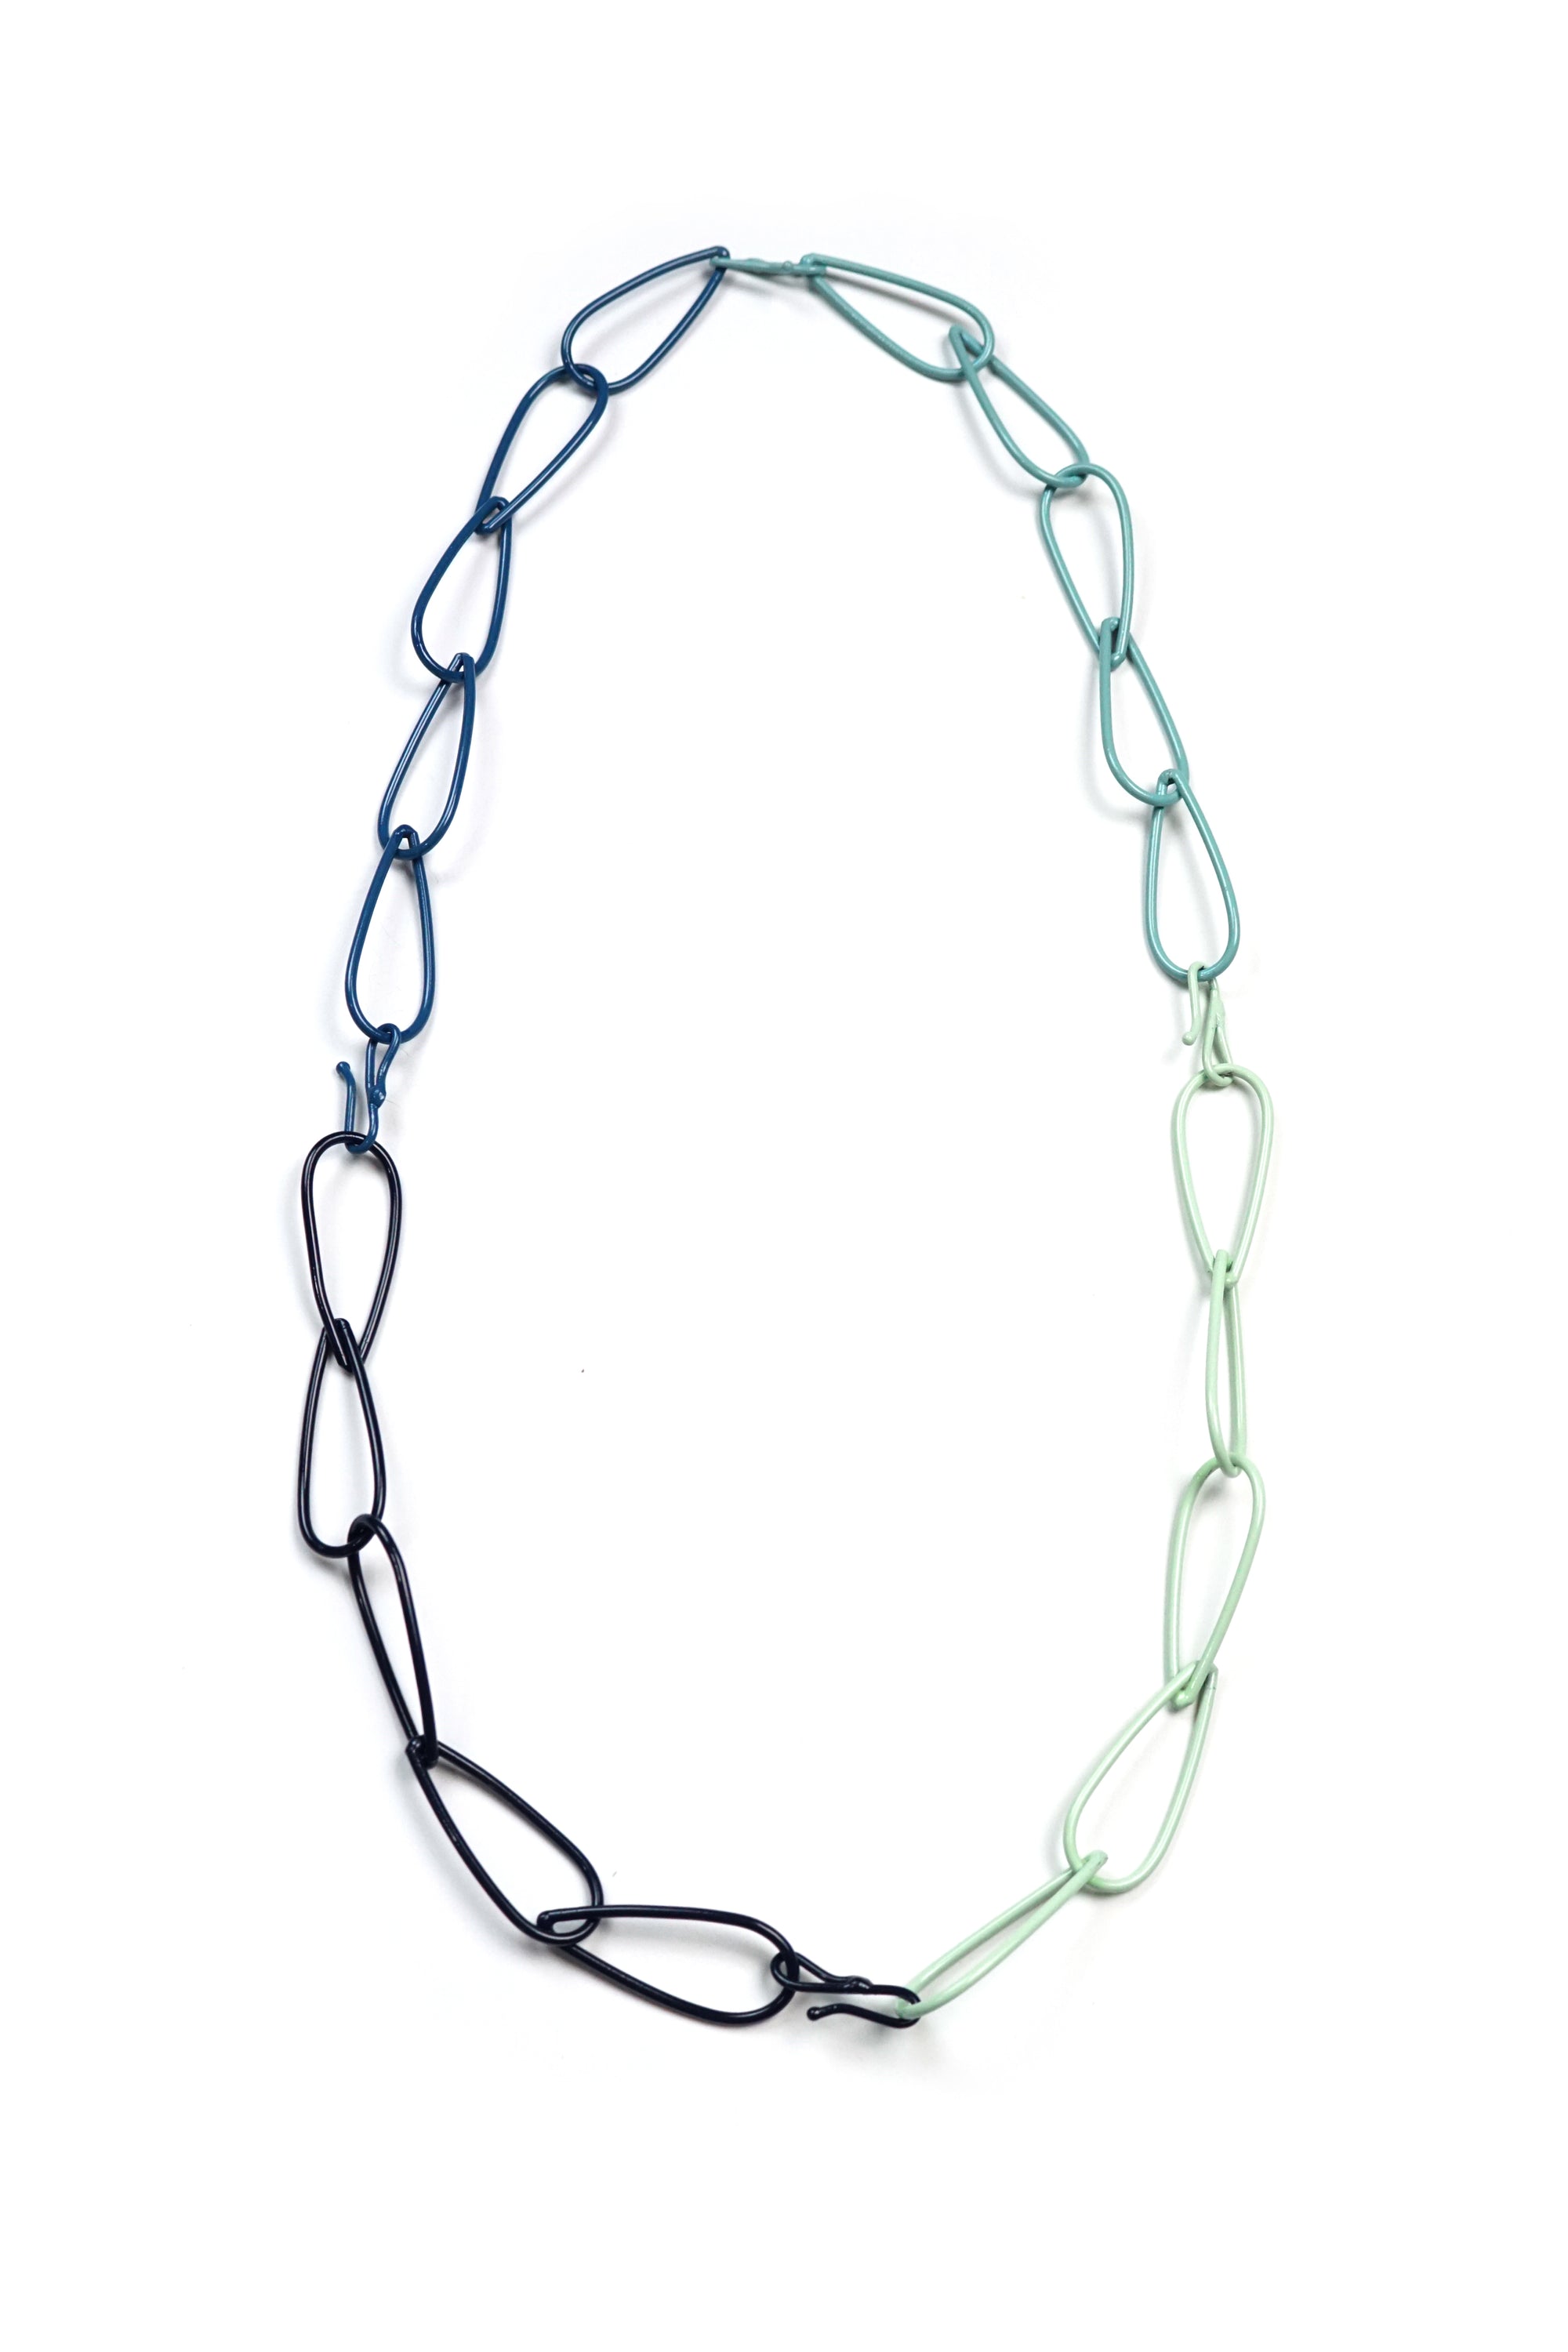 Long Modular Necklace in Azure Blue, Soft Mint, Dark Navy, and Faded Teal